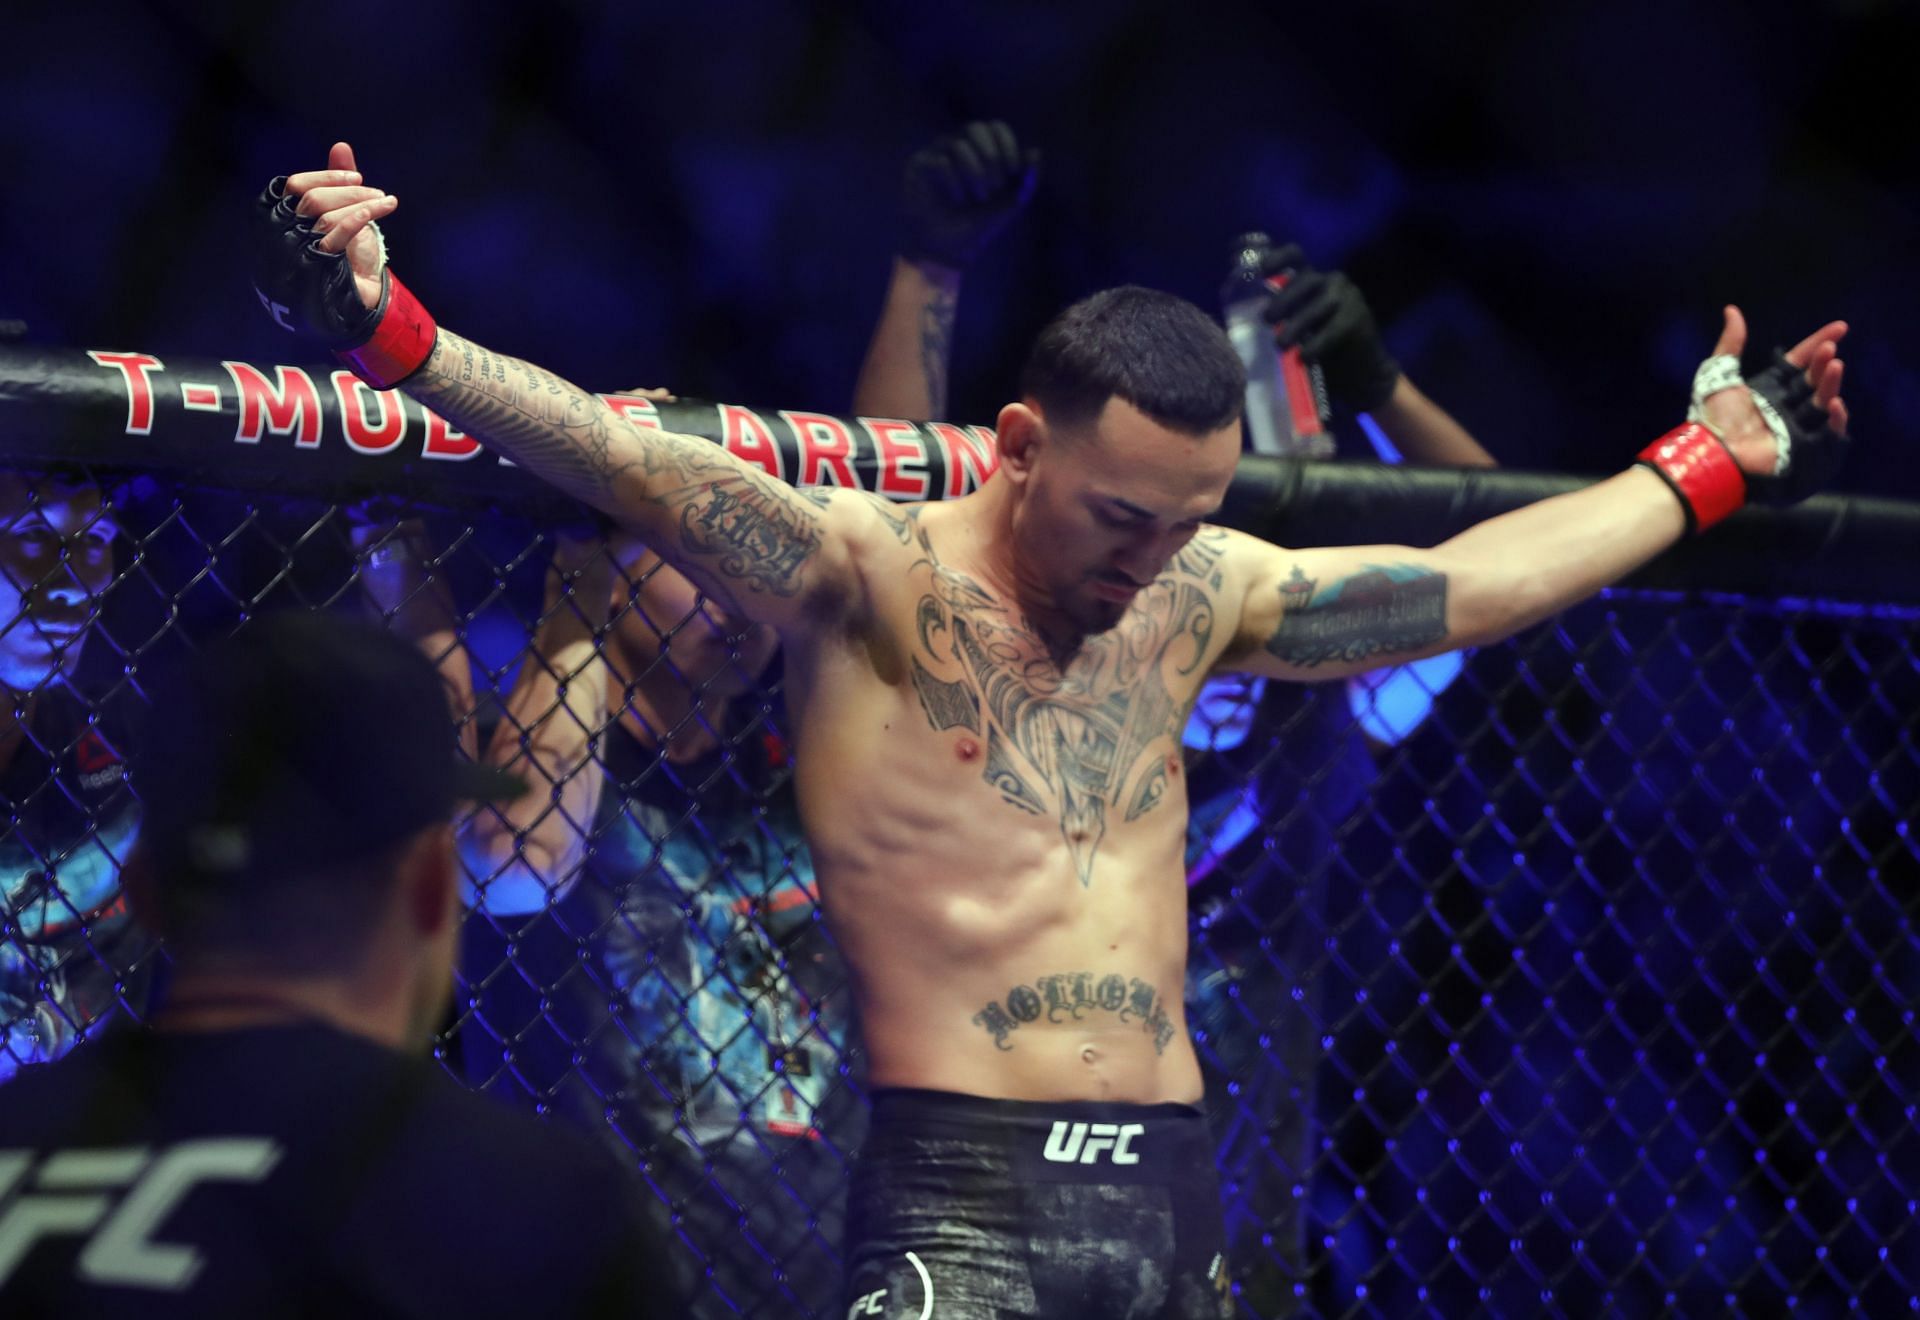 Prospective opponents for Max Holloway at 145lbs may now be few and far between